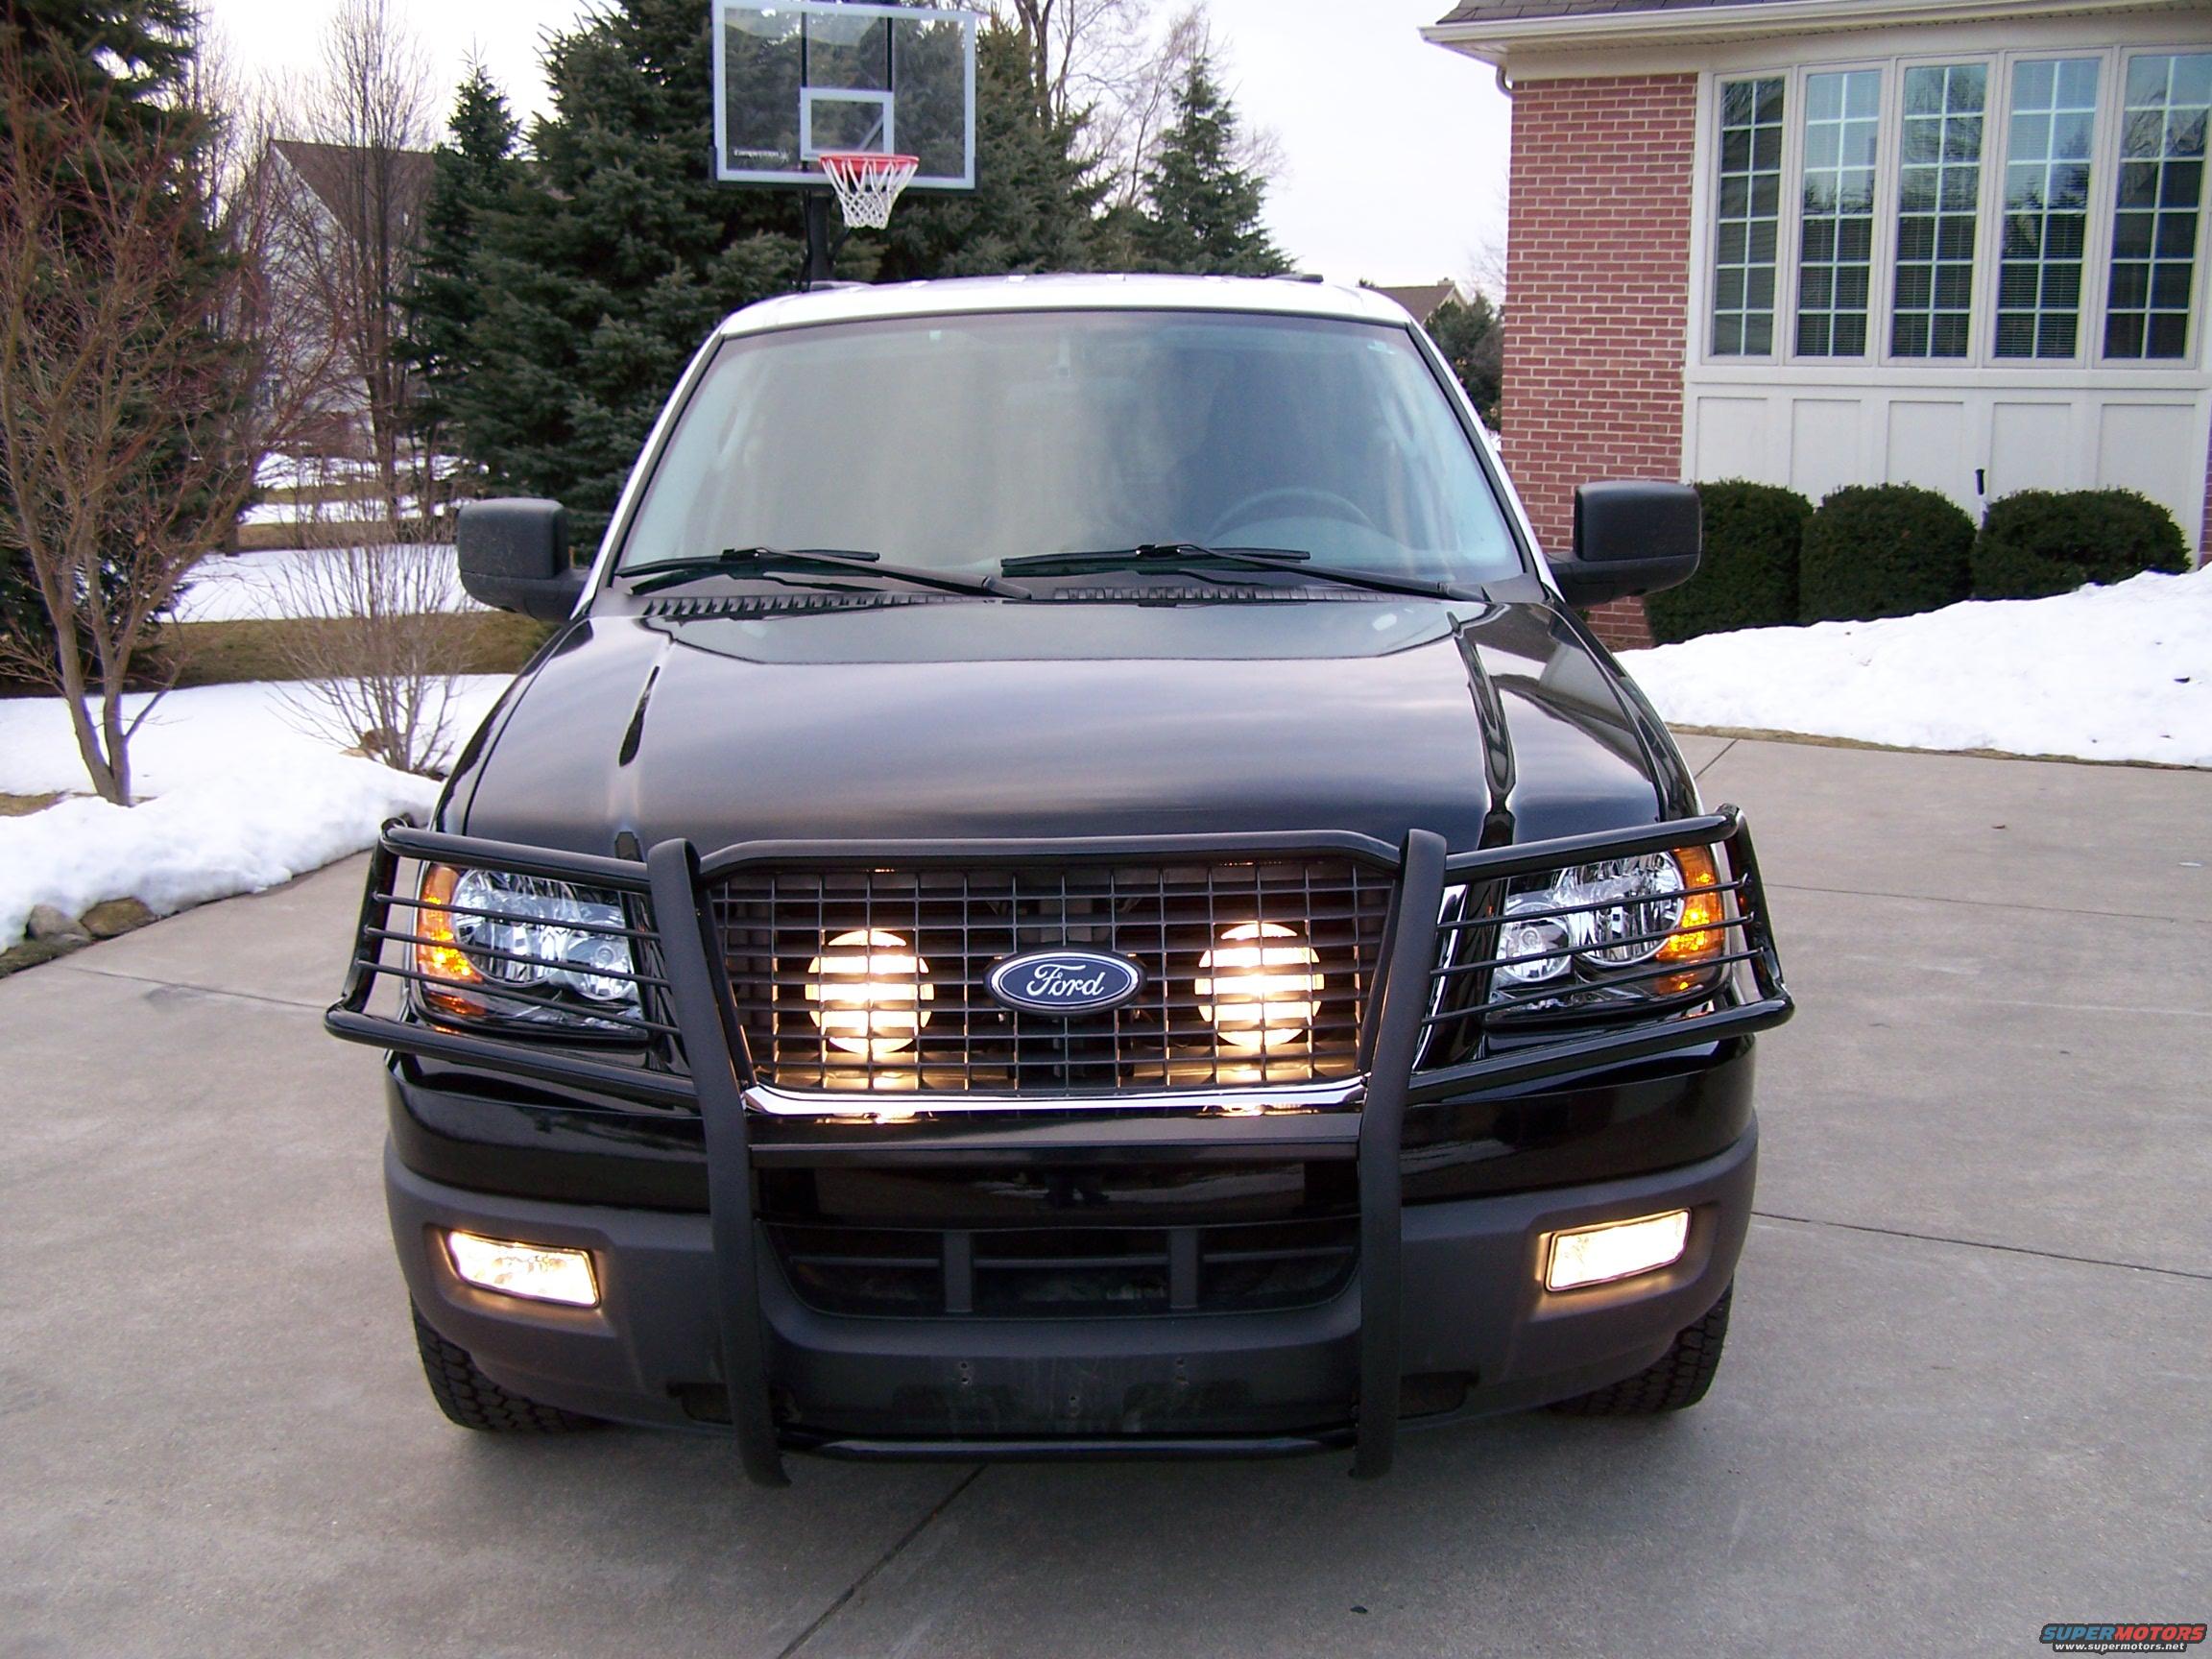 Ford expedition push bumpers #8